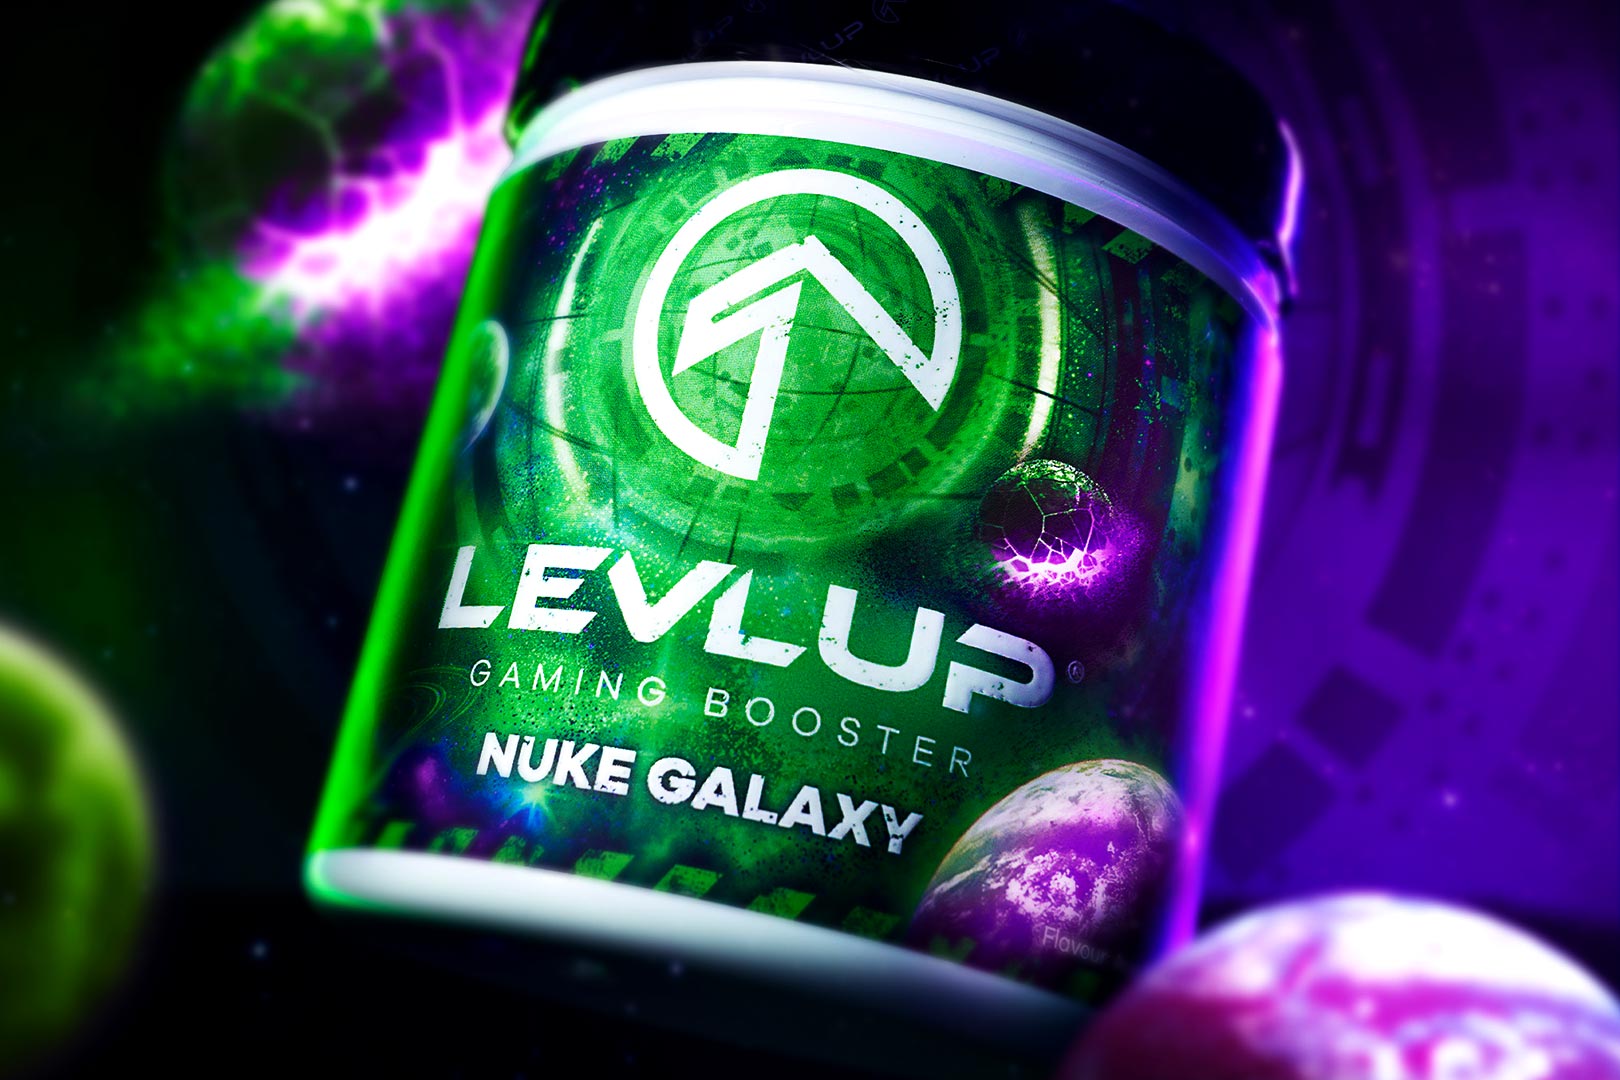 Levlup Nuke Galaxy Gaming Booster